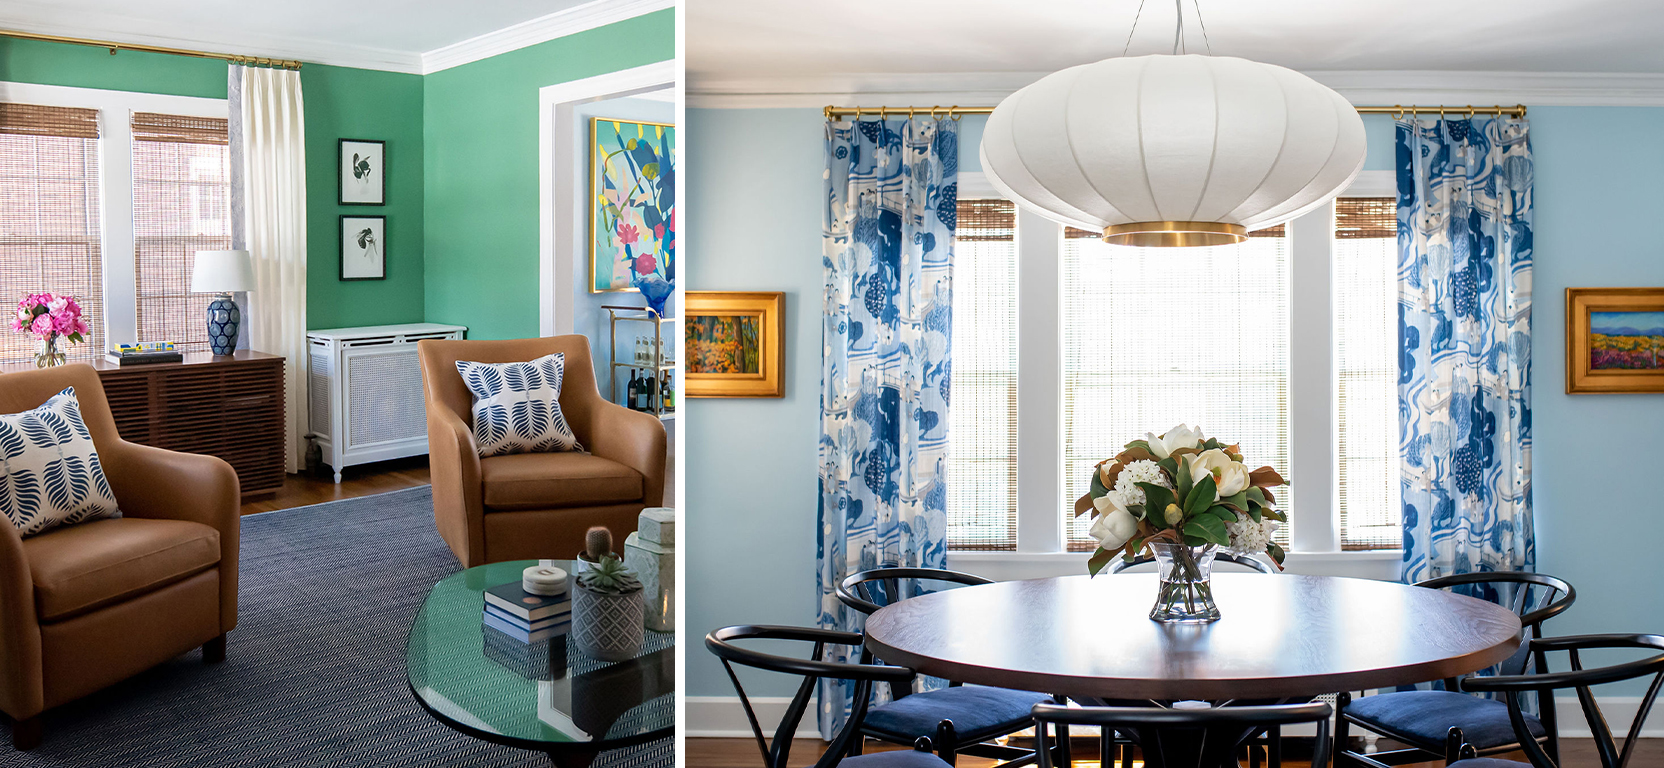 Left image: Glass coffee table with two tan leather armchairs with blue and white pillows in foreground with dark wood console table in front of window and jewel green painted walls,Right image: Round dining table with six wishbone dining chairs, bouquet centerpiece, in front of large window with blue and white curtains and light blue walls.